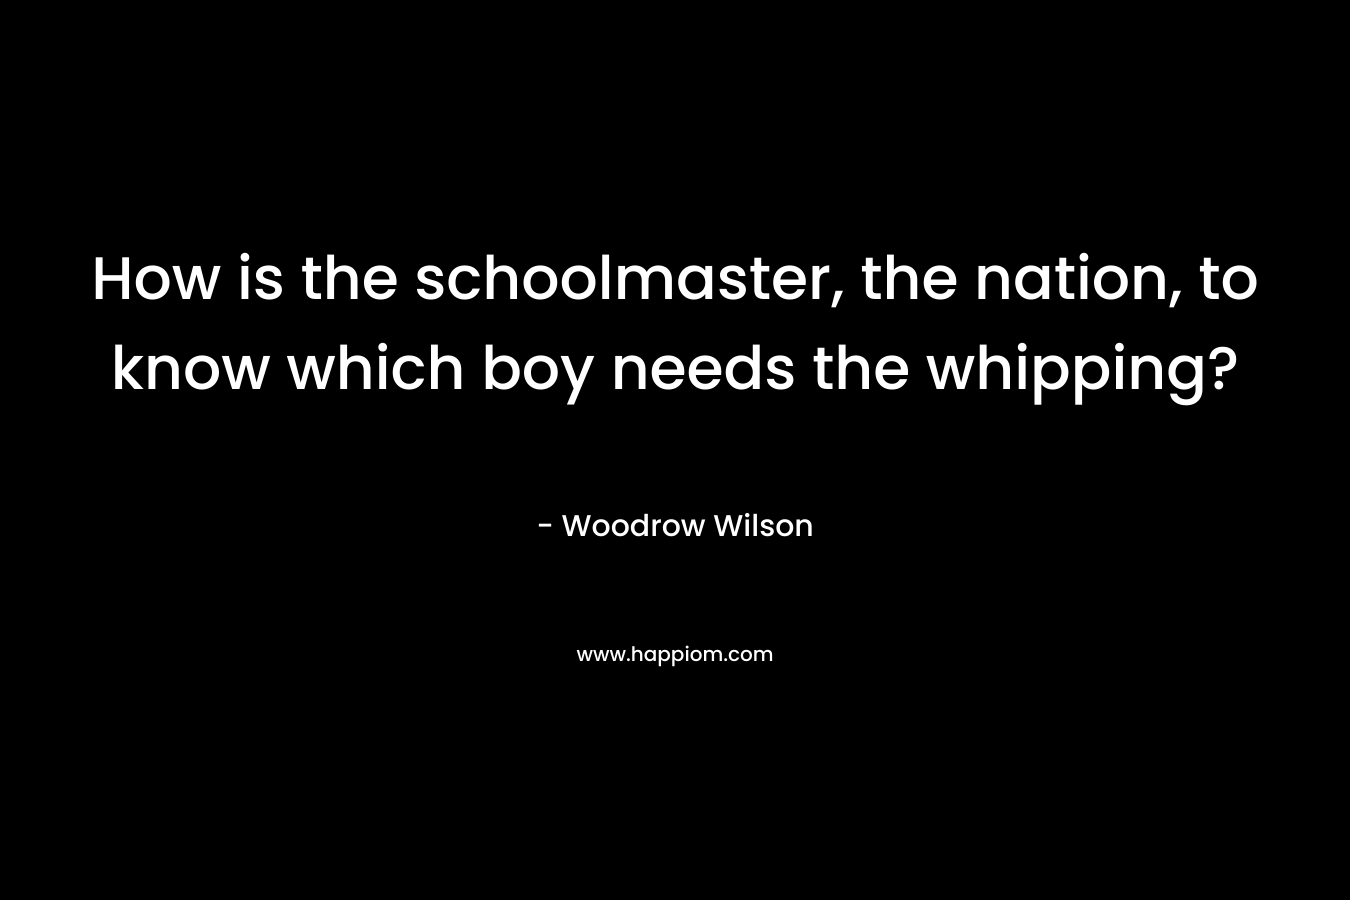 How is the schoolmaster, the nation, to know which boy needs the whipping? – Woodrow Wilson